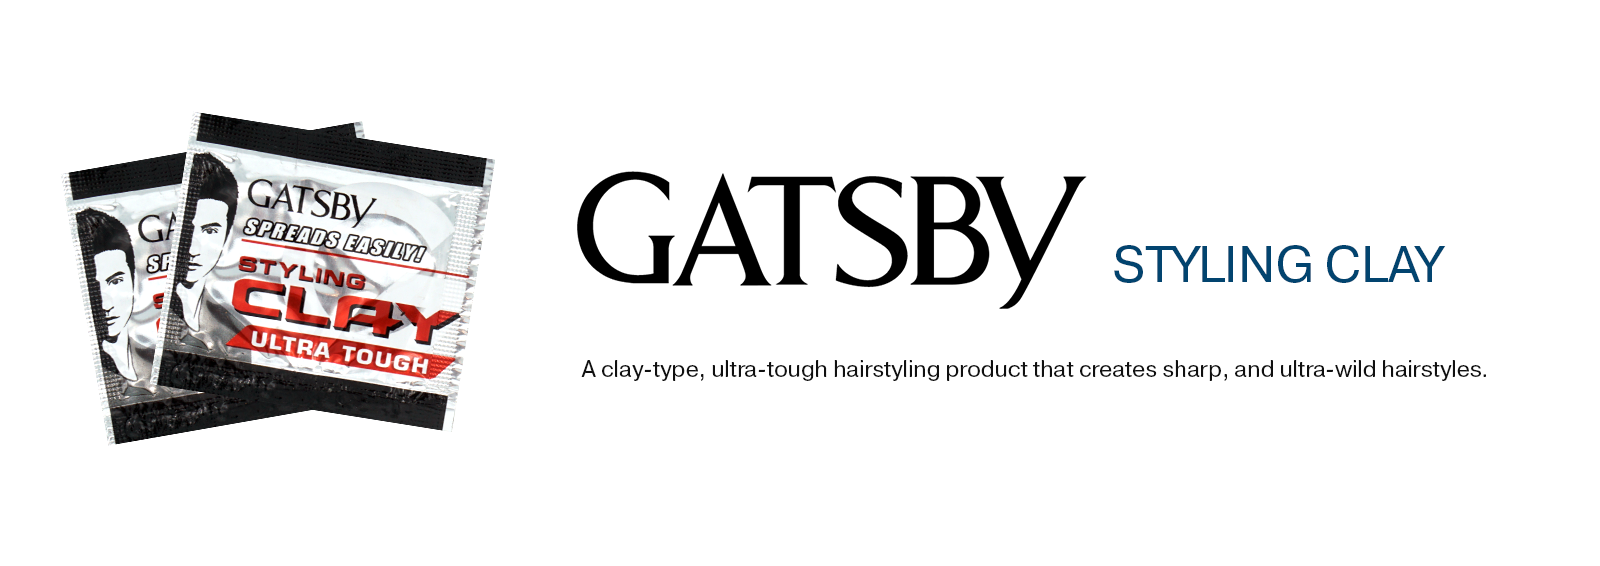 GATSBY Styling Clay banner